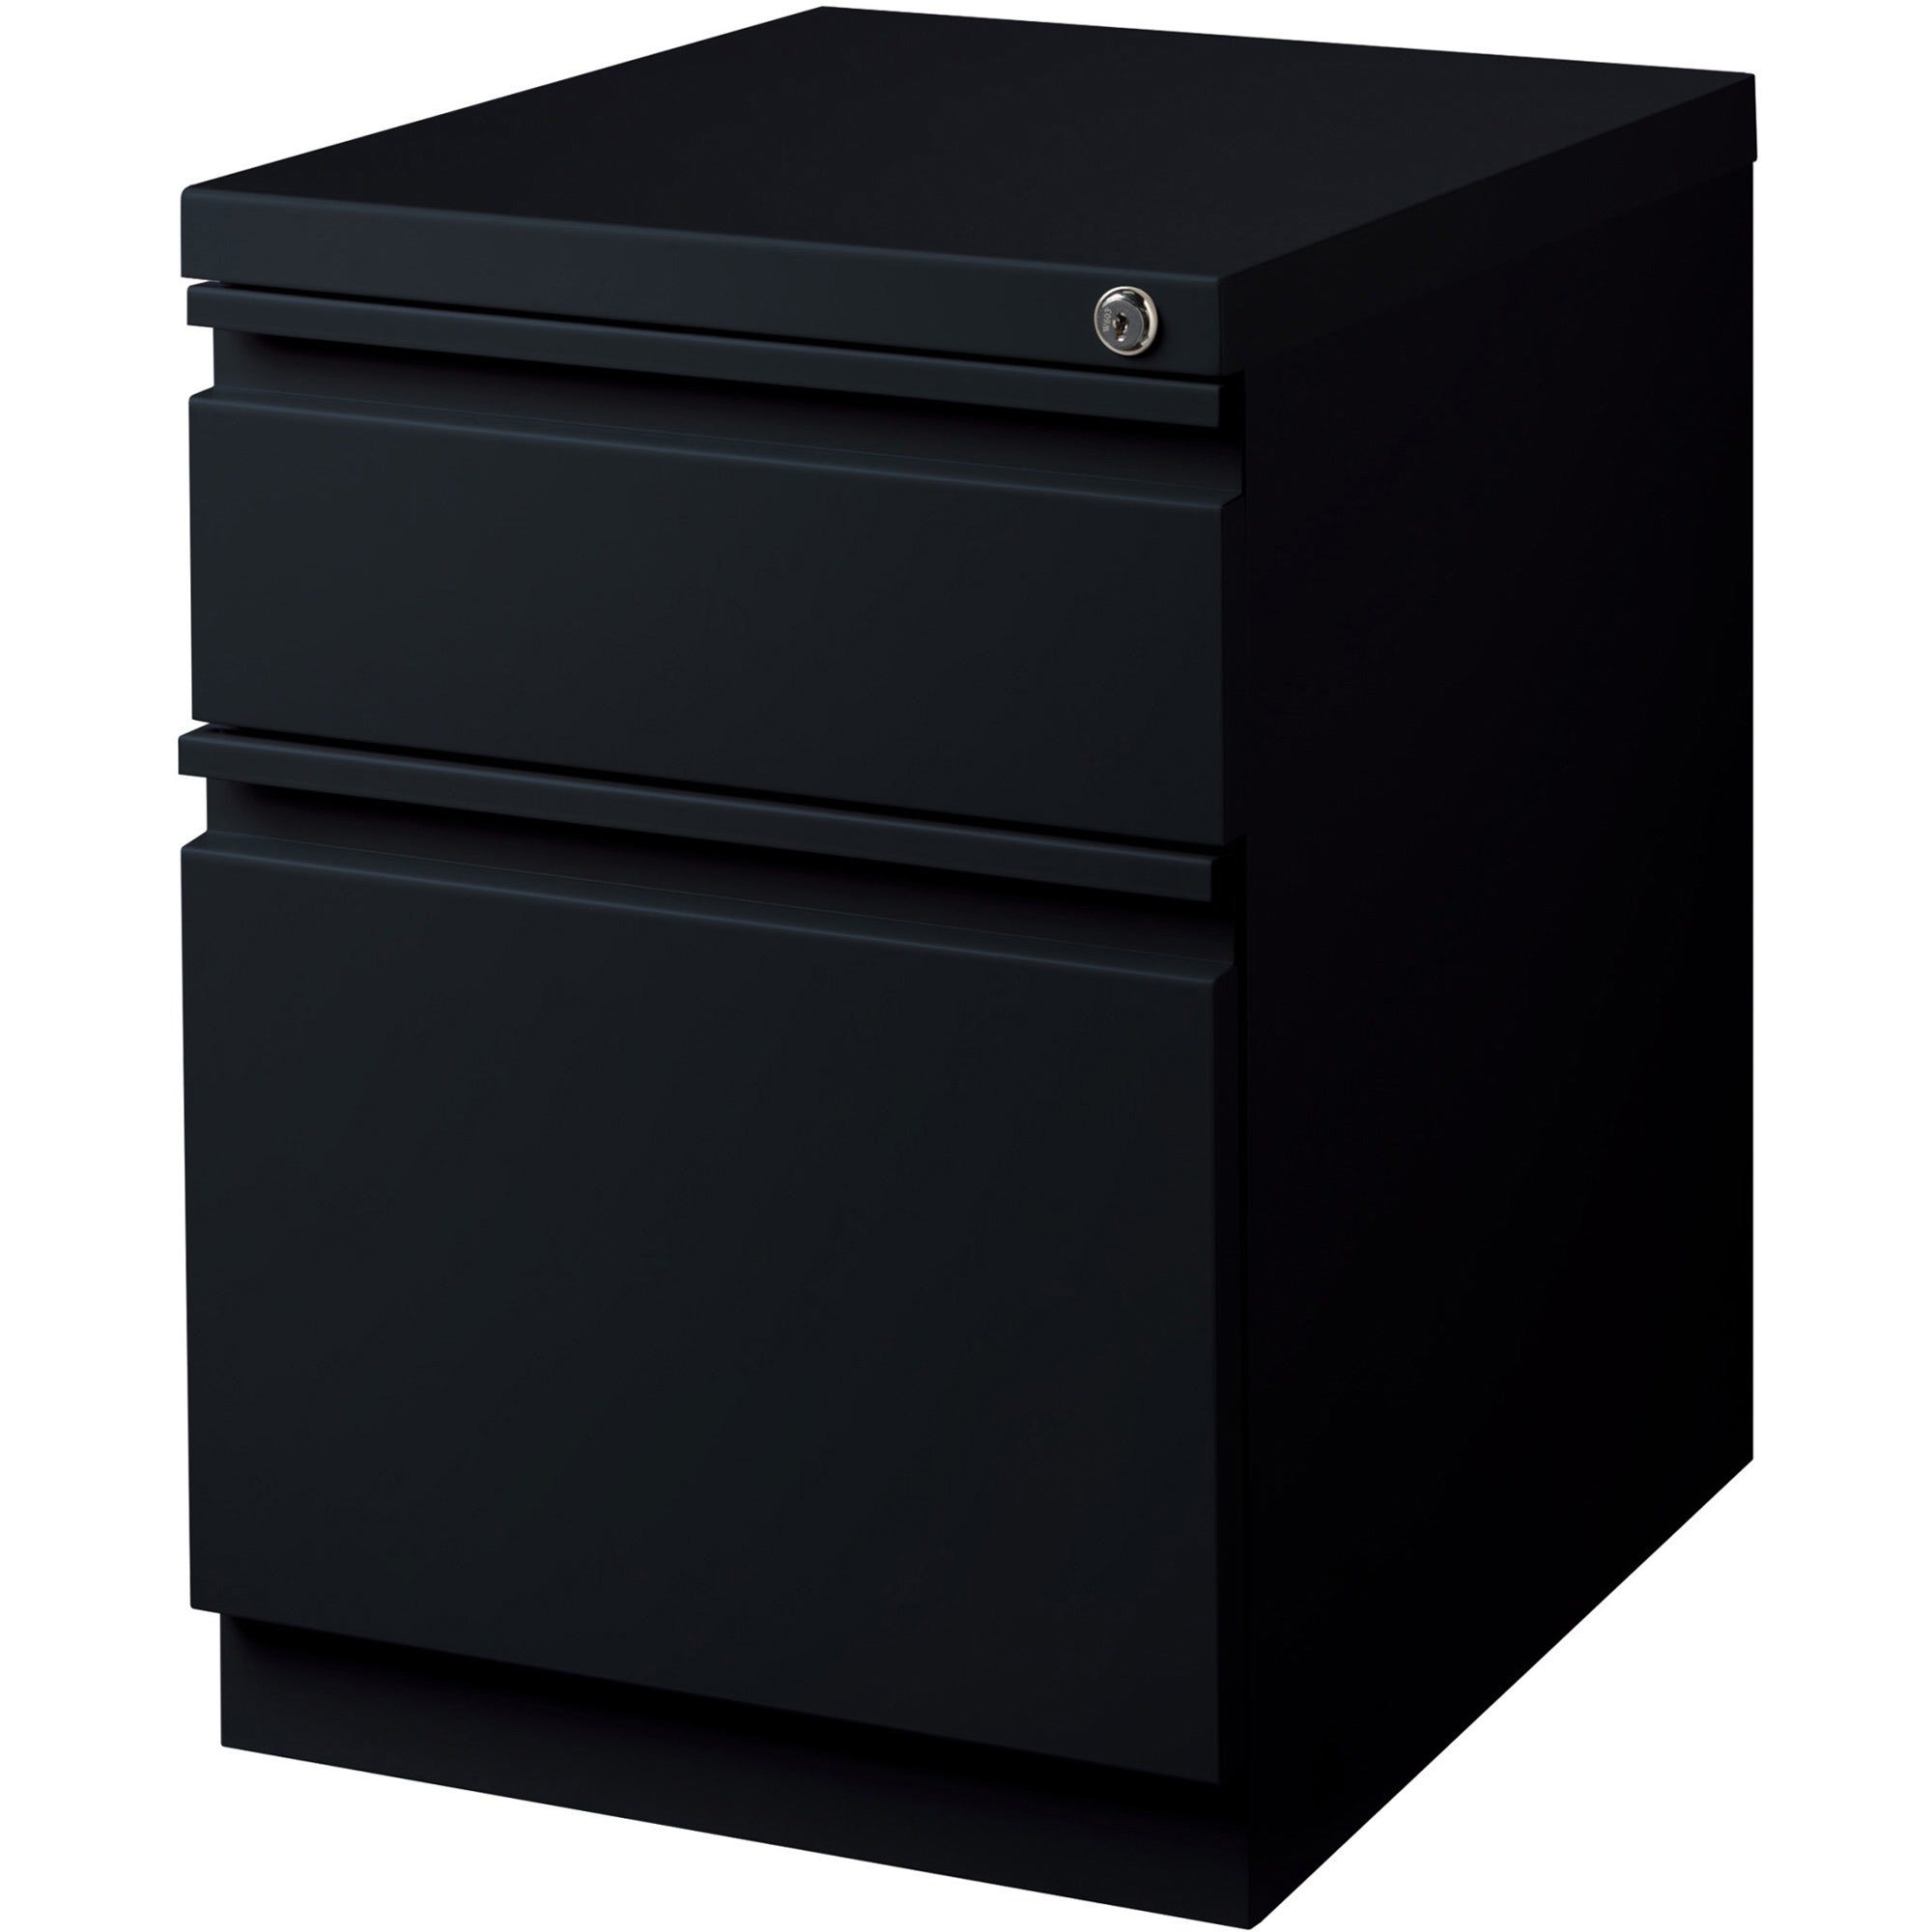 lorell-20-box-file-mobile-pedestal-15-x-199-x-238-for-box-file-letter-mobility-ball-bearing-suspension-removable-lock-pull-out-drawer-recessed-drawer-anti-tip-casters-key-lock-black-steel-recycled_llr00055 - 4